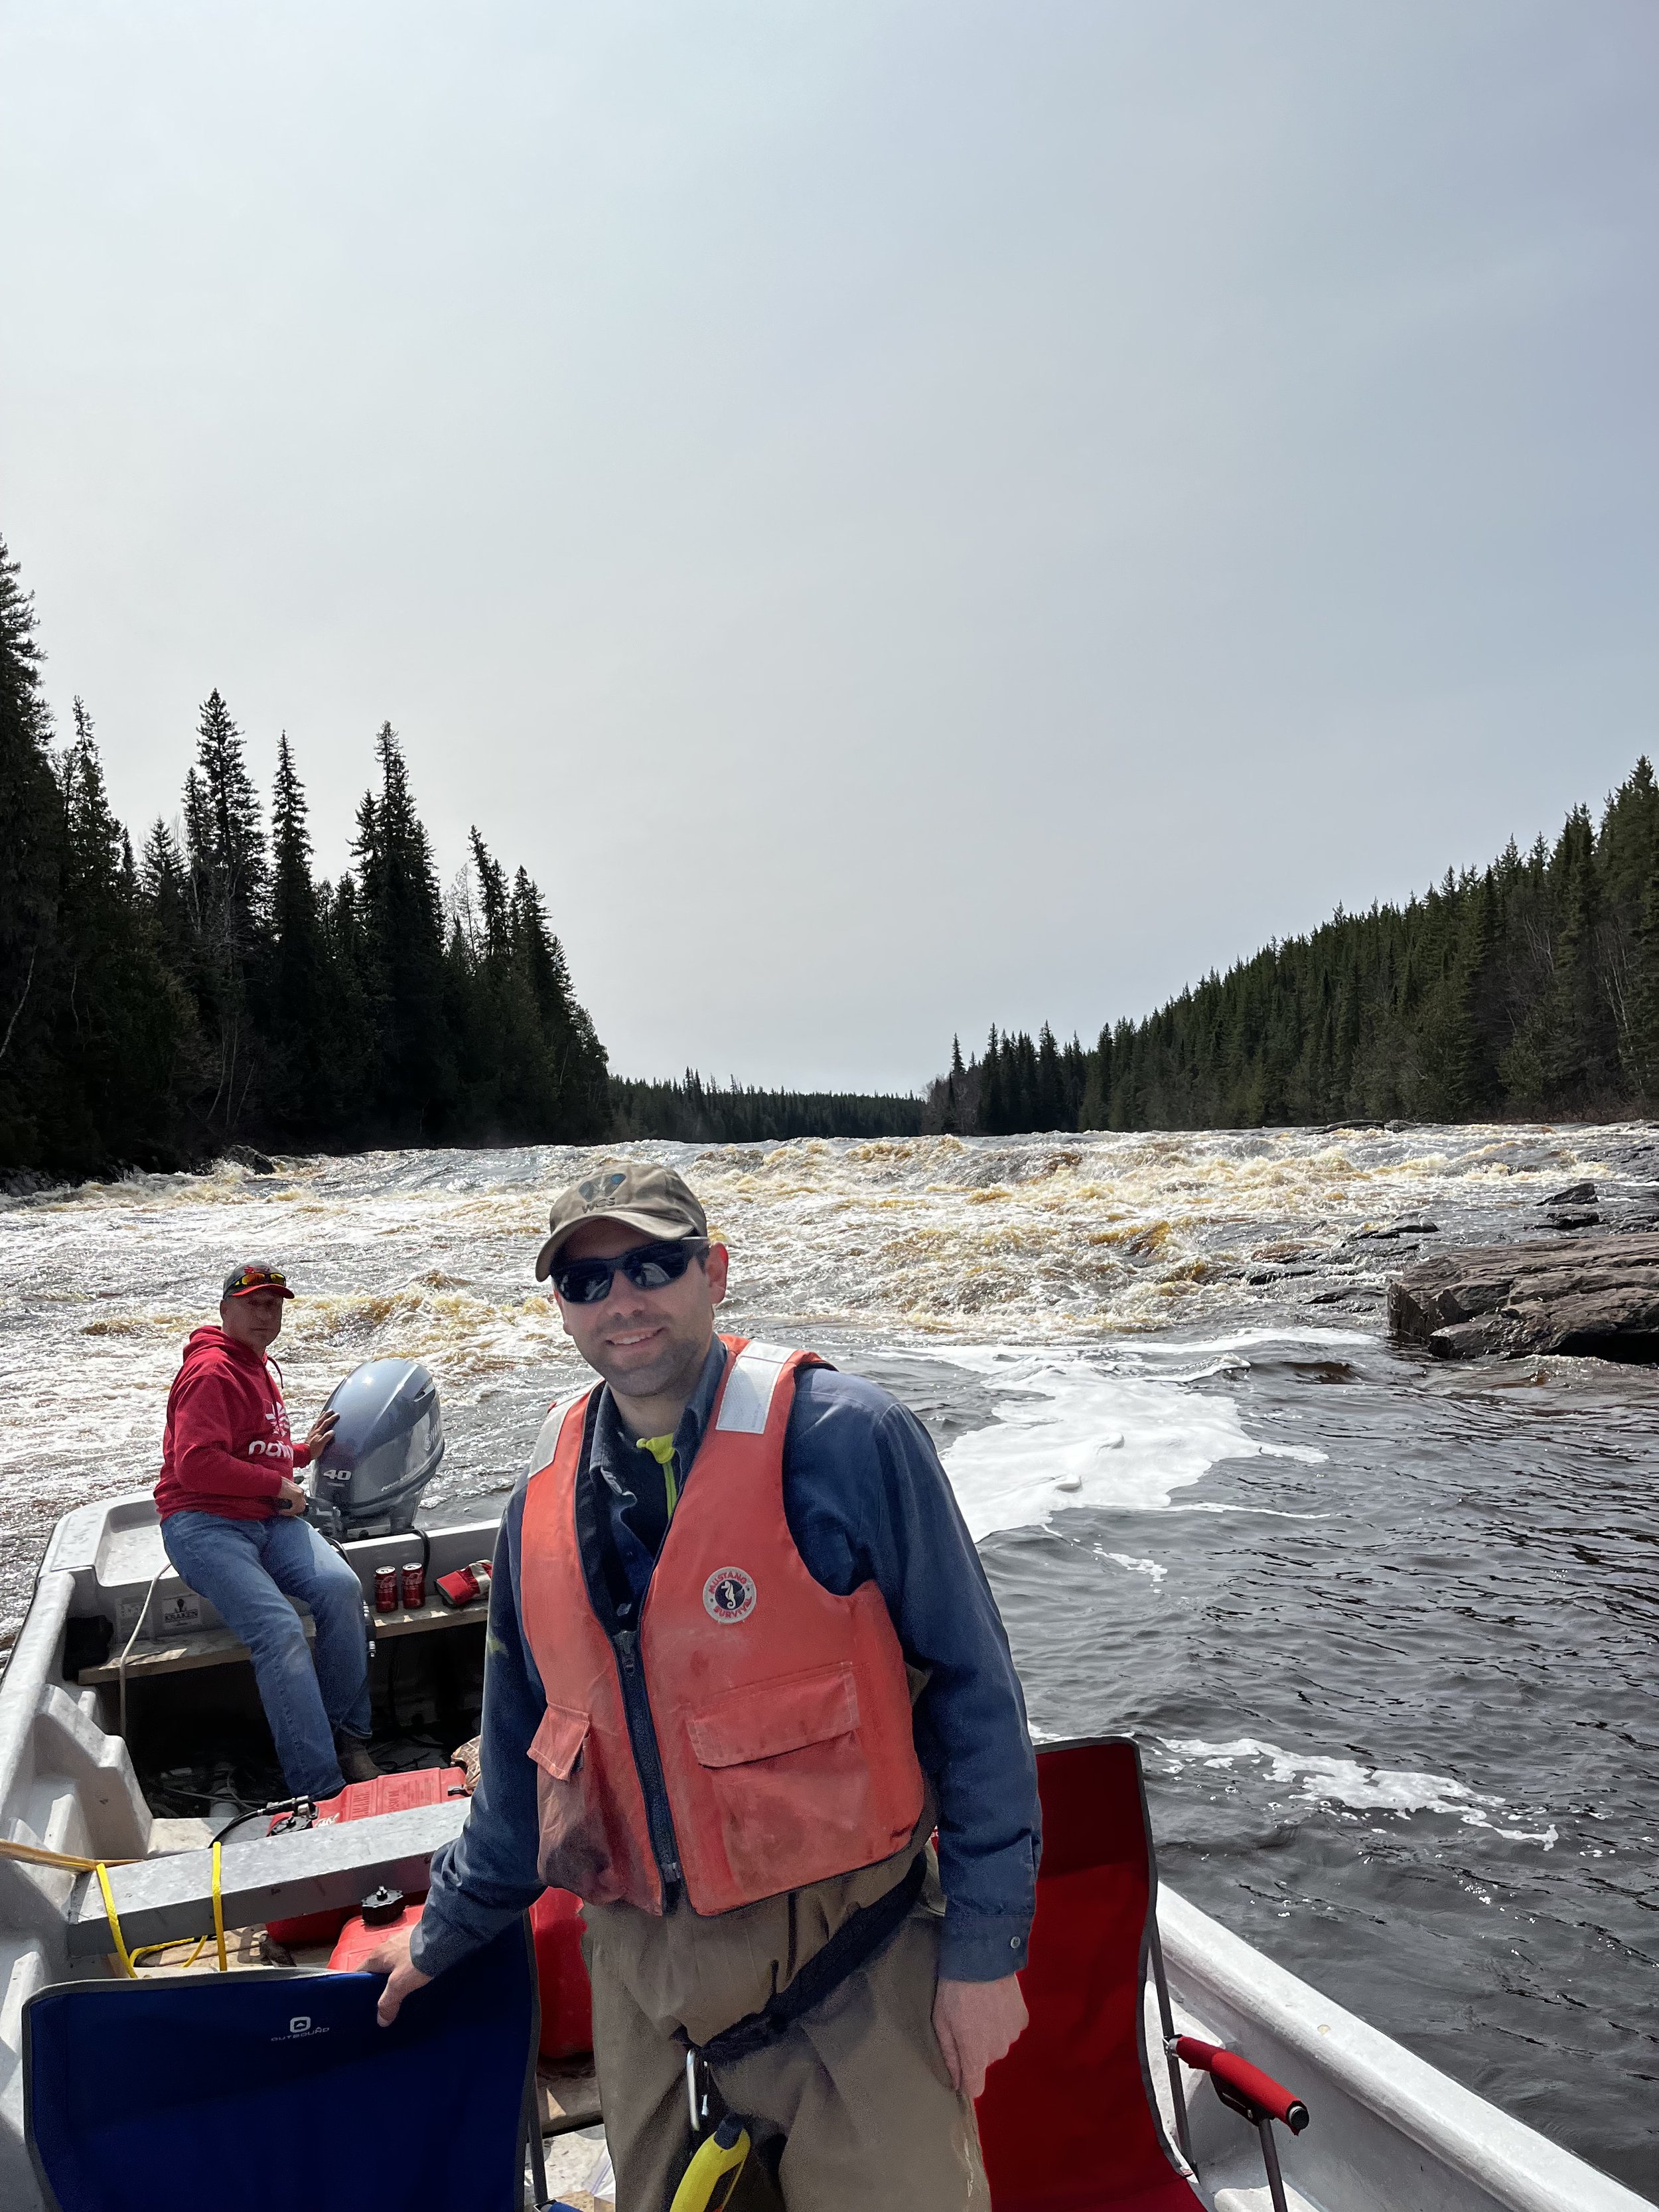 Jacob Seguin (front, WCS Canada) and Ryan Sutherland (back, Sutherland Exploration Services) snap a photo far up the North French River